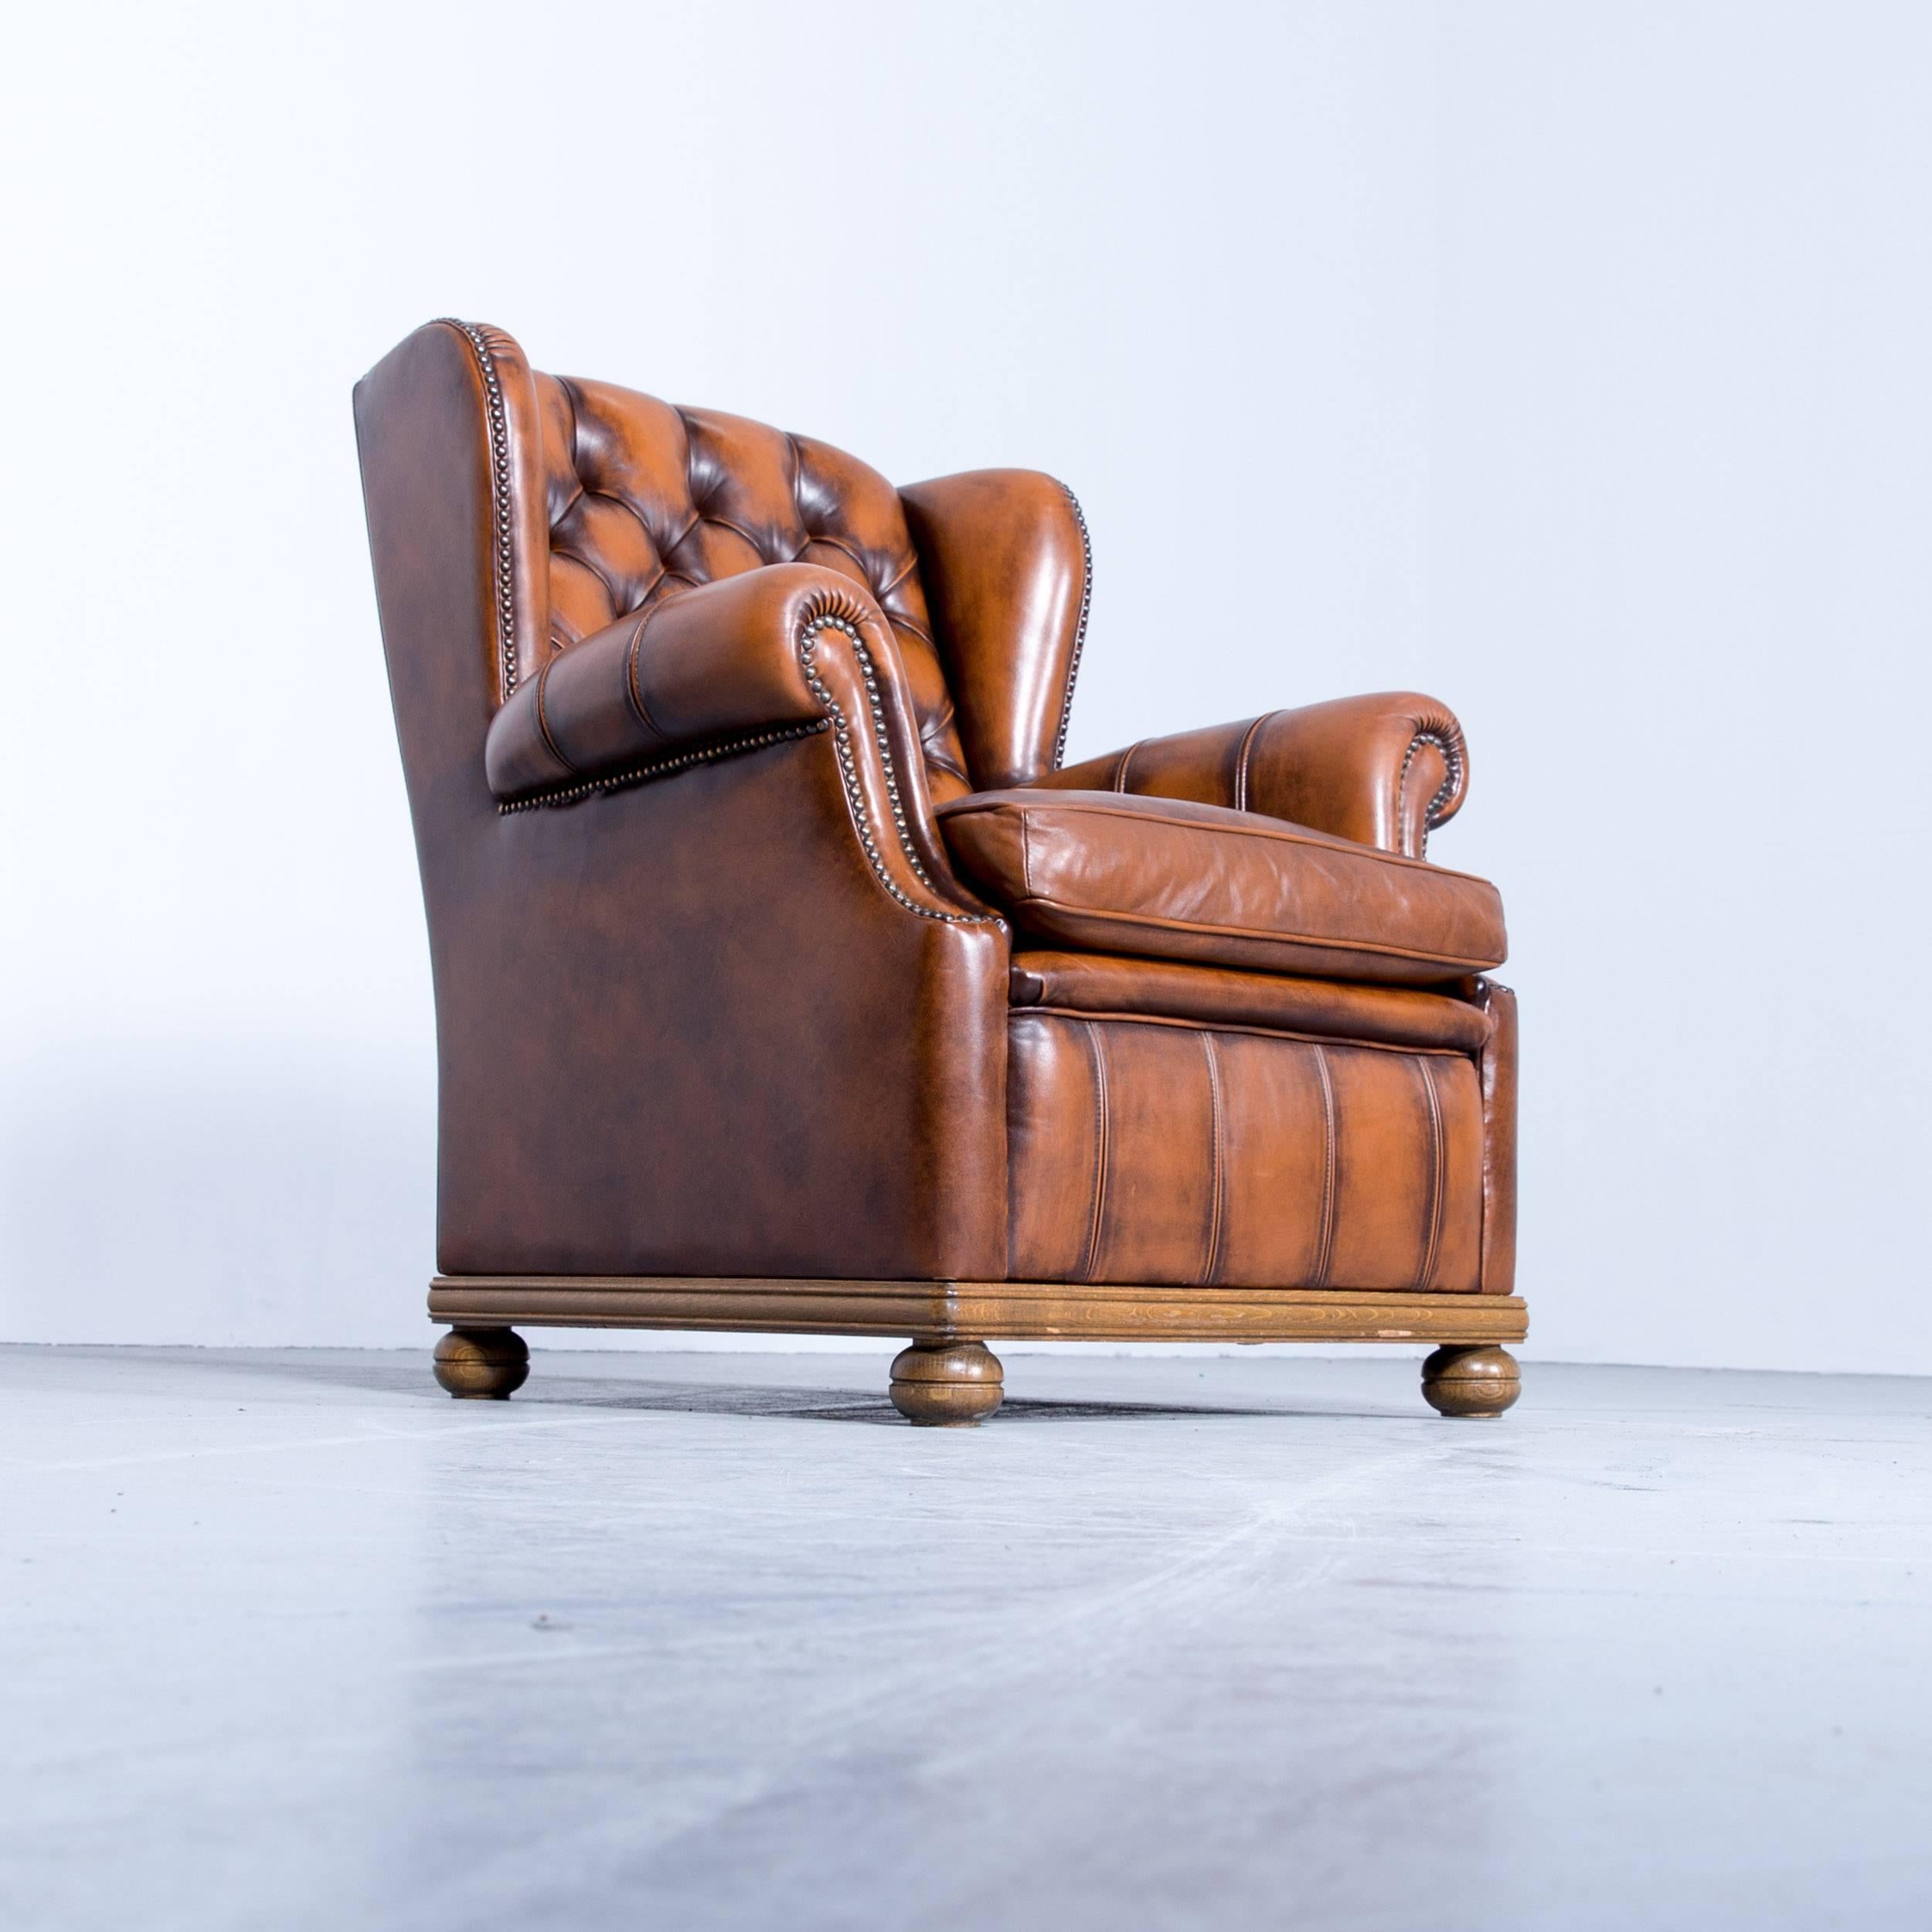 Chesterfield Armchair Leather Brown One Seat Couch Retro Vintage Rivets 2